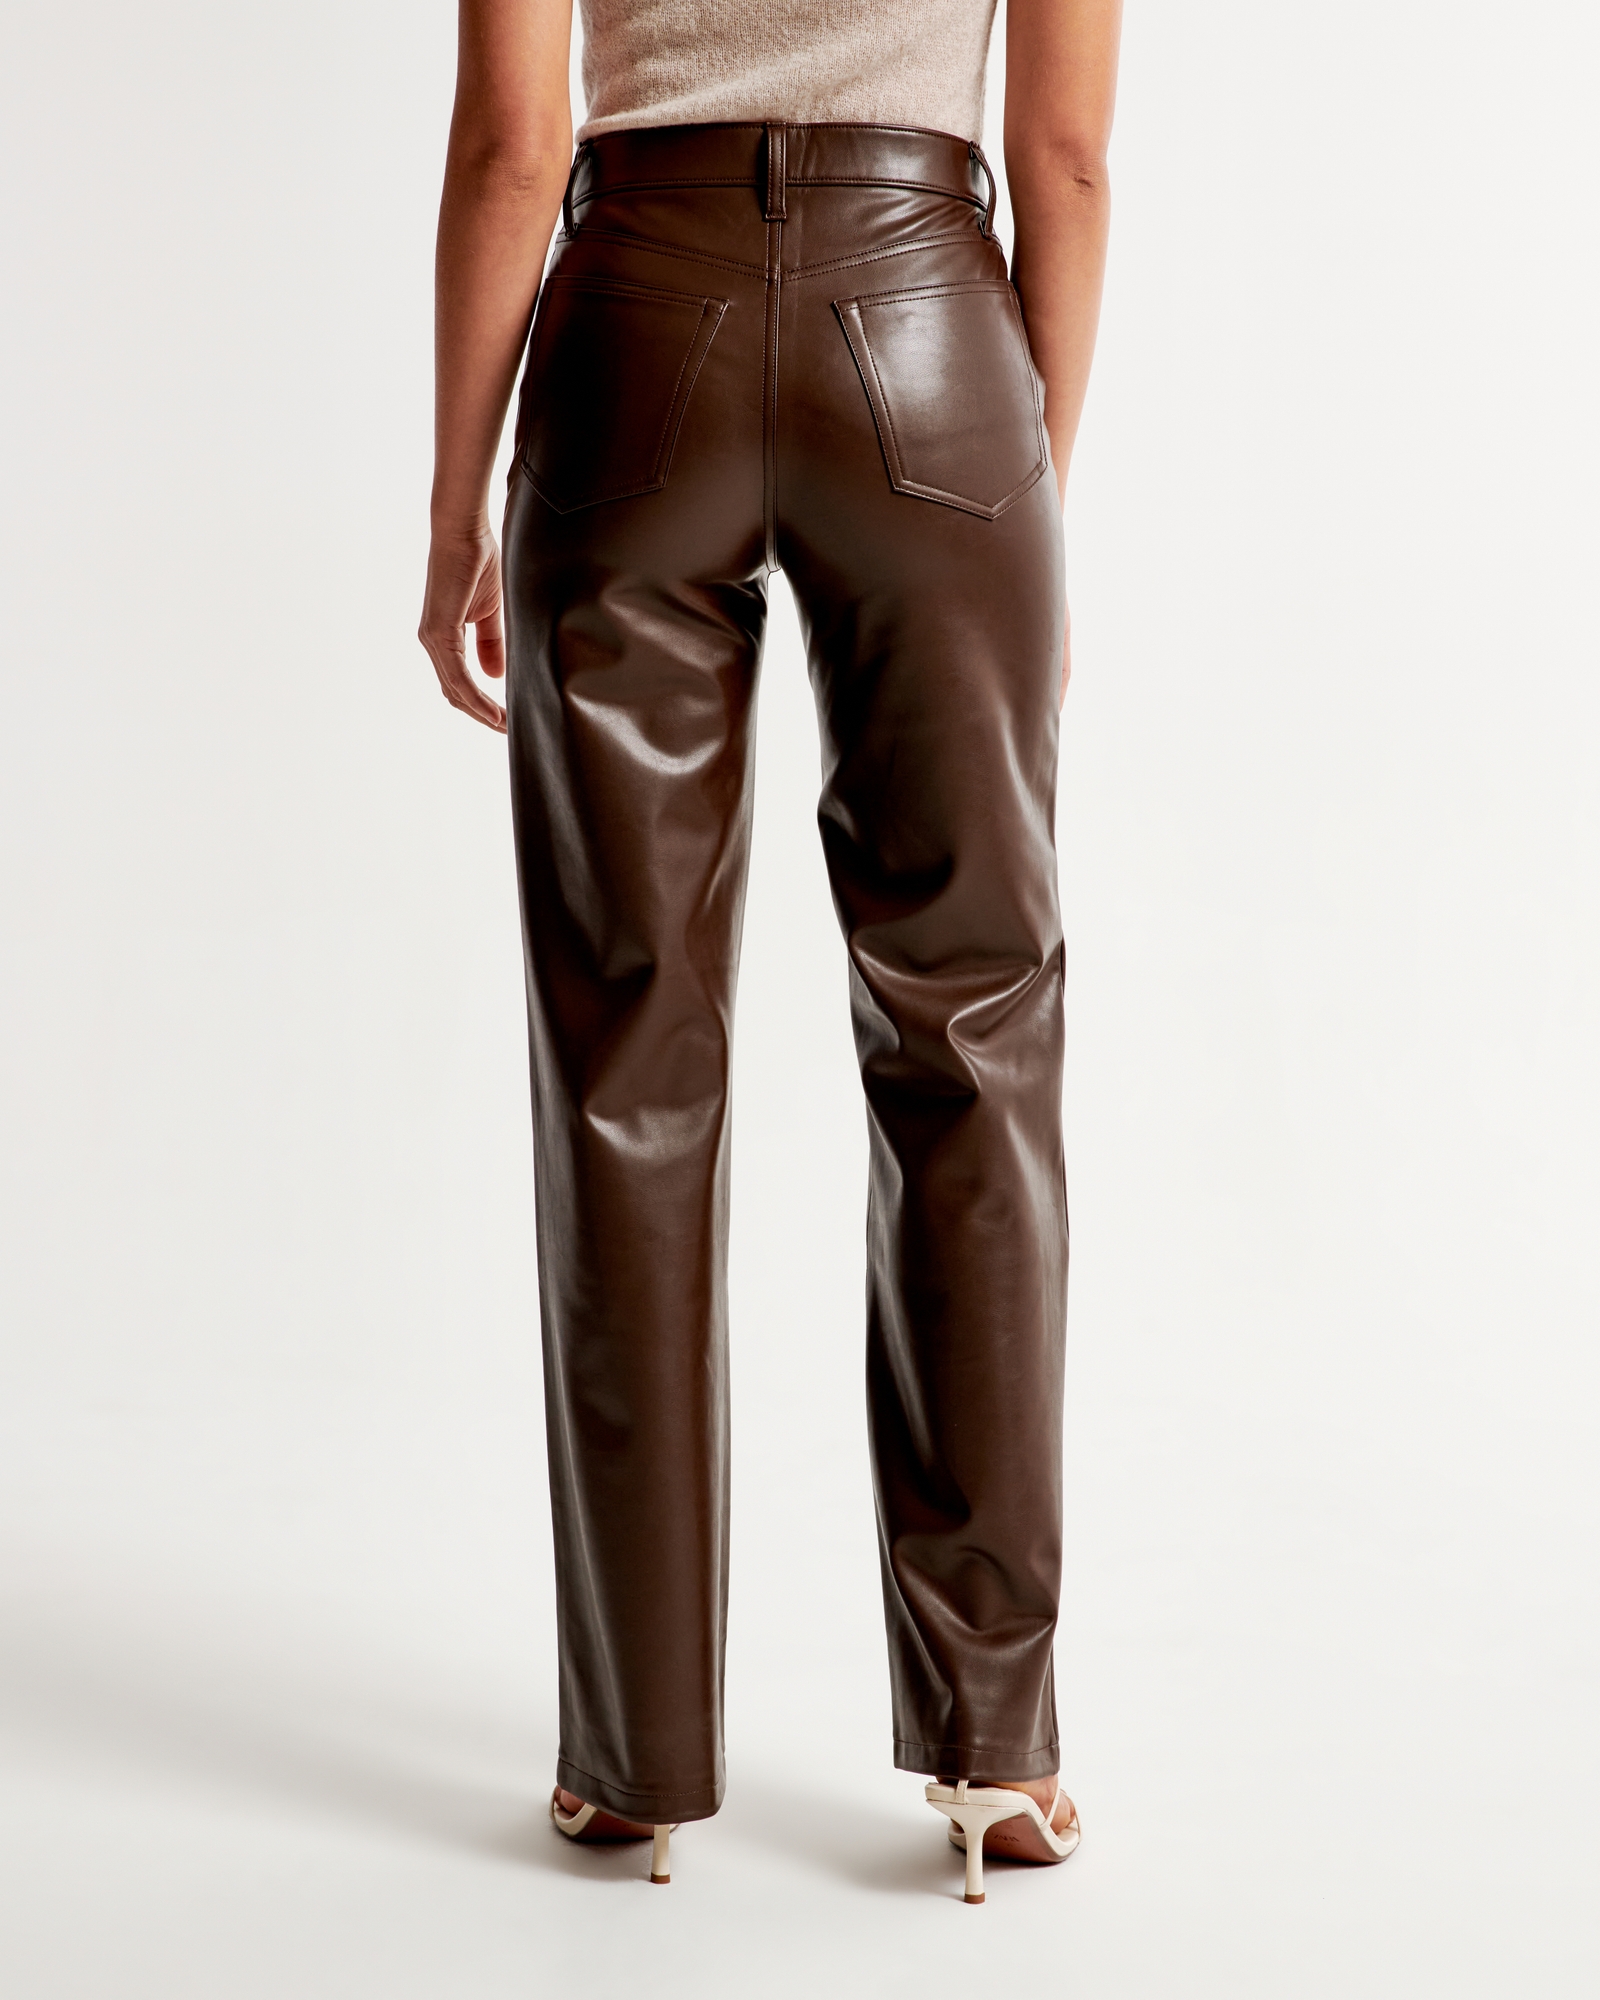 5'1] $27 dupe for the Abercrombie brown leather pants from Asos Petite.  Sizing is weird though : r/PetiteFashionAdvice